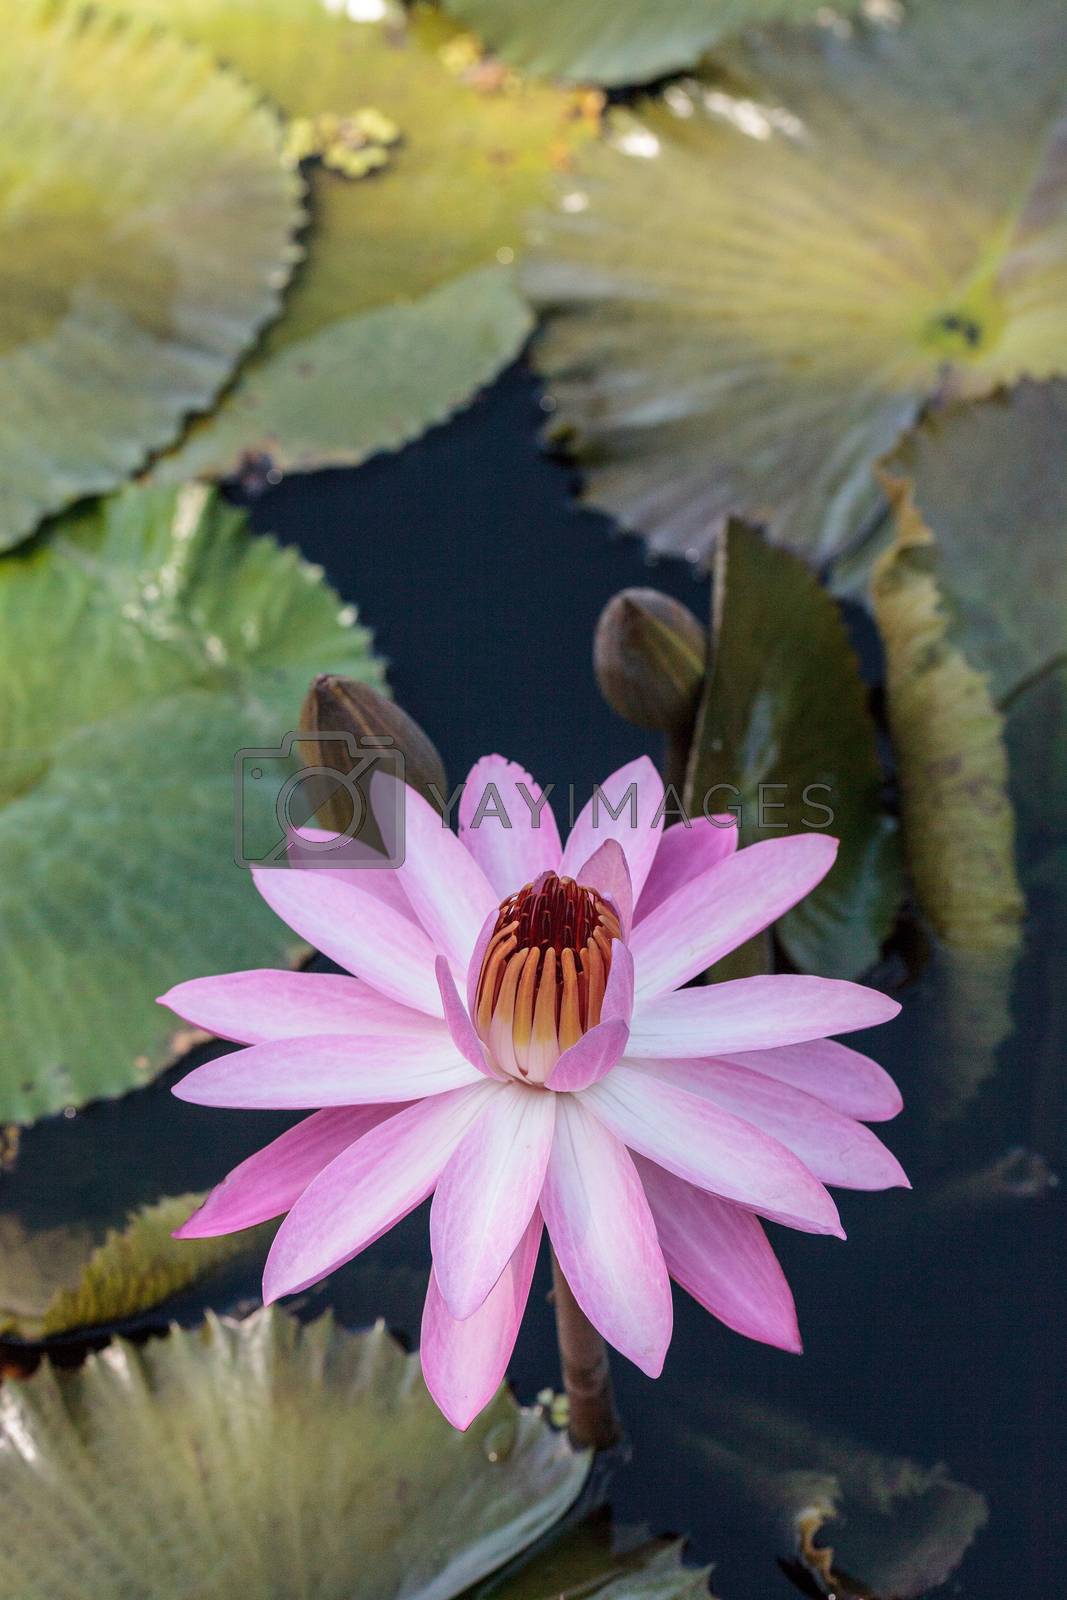 Royalty free image of Pink water lily Nymphaea blooms by steffstarr